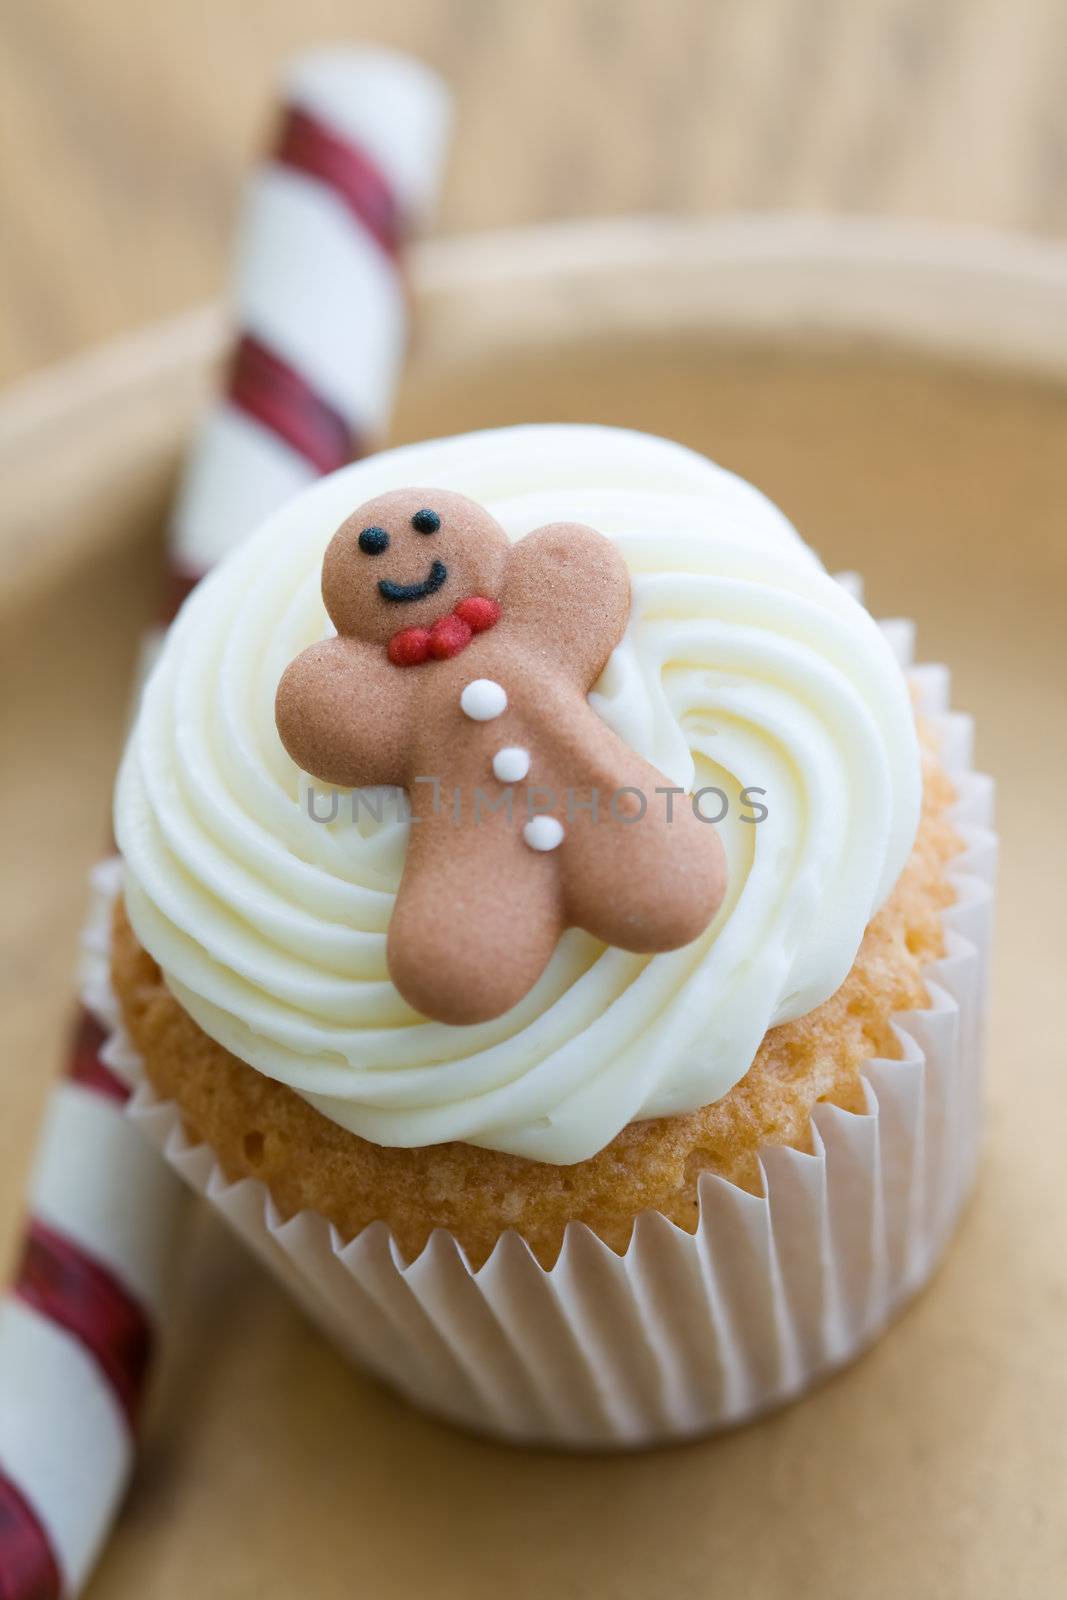 Mini cupcake decorated with a tiny gingerbread man